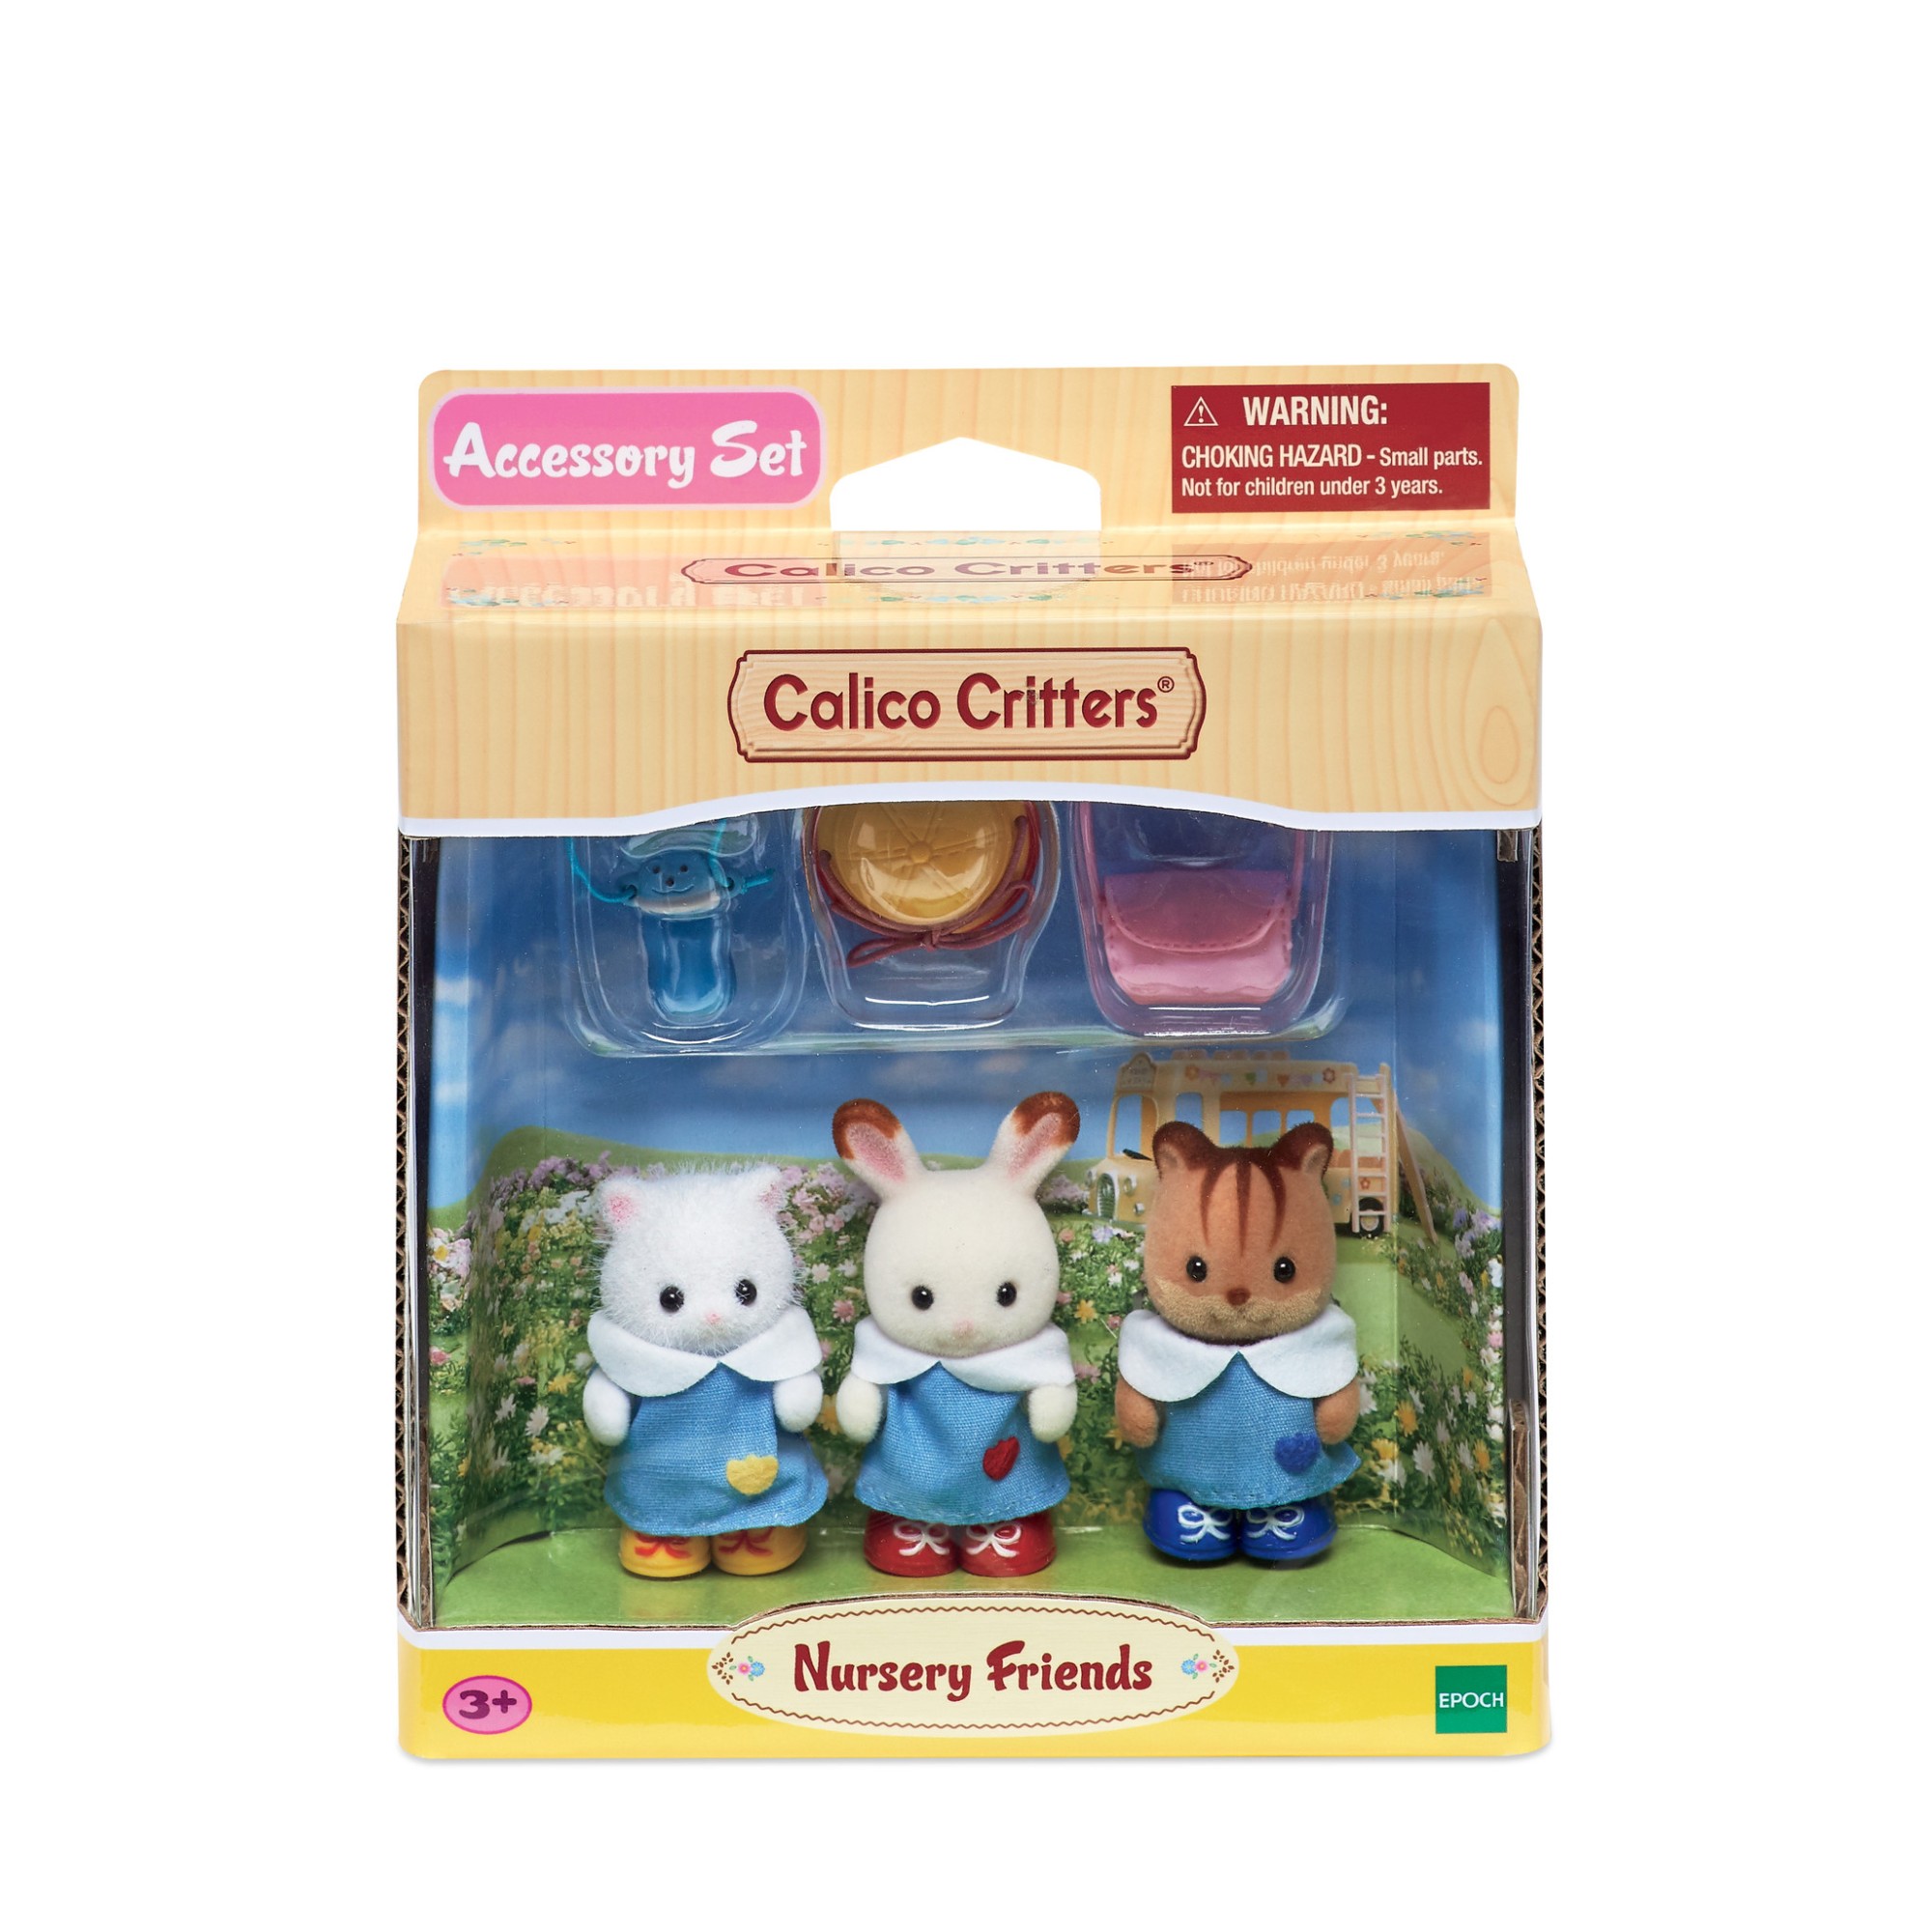 Calico Critters Nursery Friends, Set of 3 Collectible Doll Figures in Nursery School Outfits - image 2 of 4